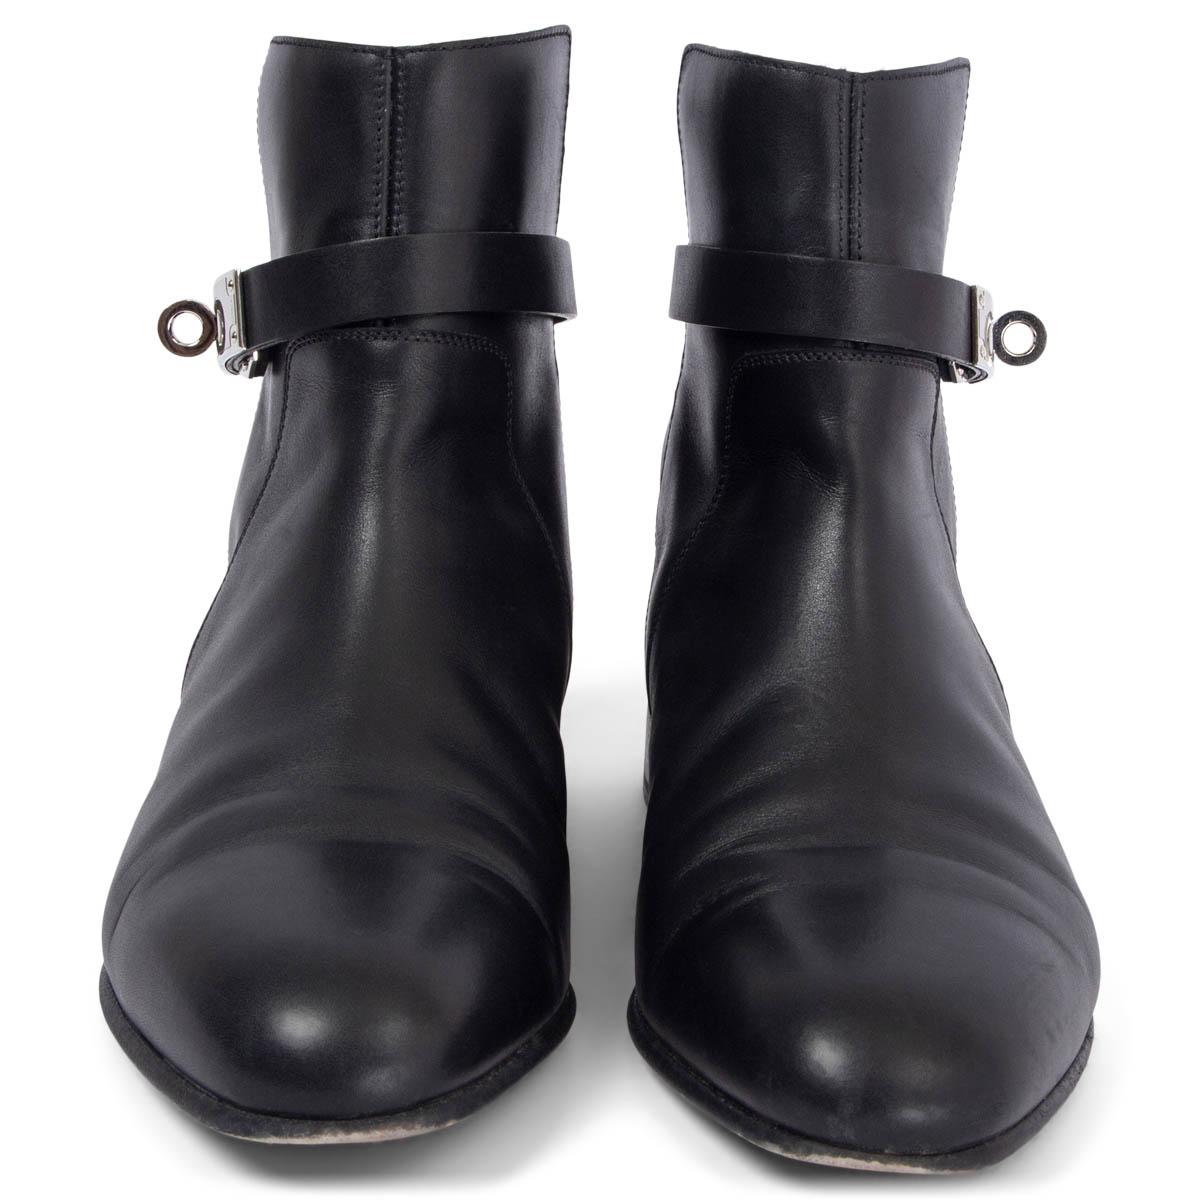 100% authentic Hermès Neo ankle boots in smooth black calfskin featuring palladium buckle. Have been worn and are in excellent condition. (Show heavy wear on sole.)

Measurements
Imprinted Size	36
Shoe Size	36
Inside Sole	23cm (9in)
Width	7.5cm